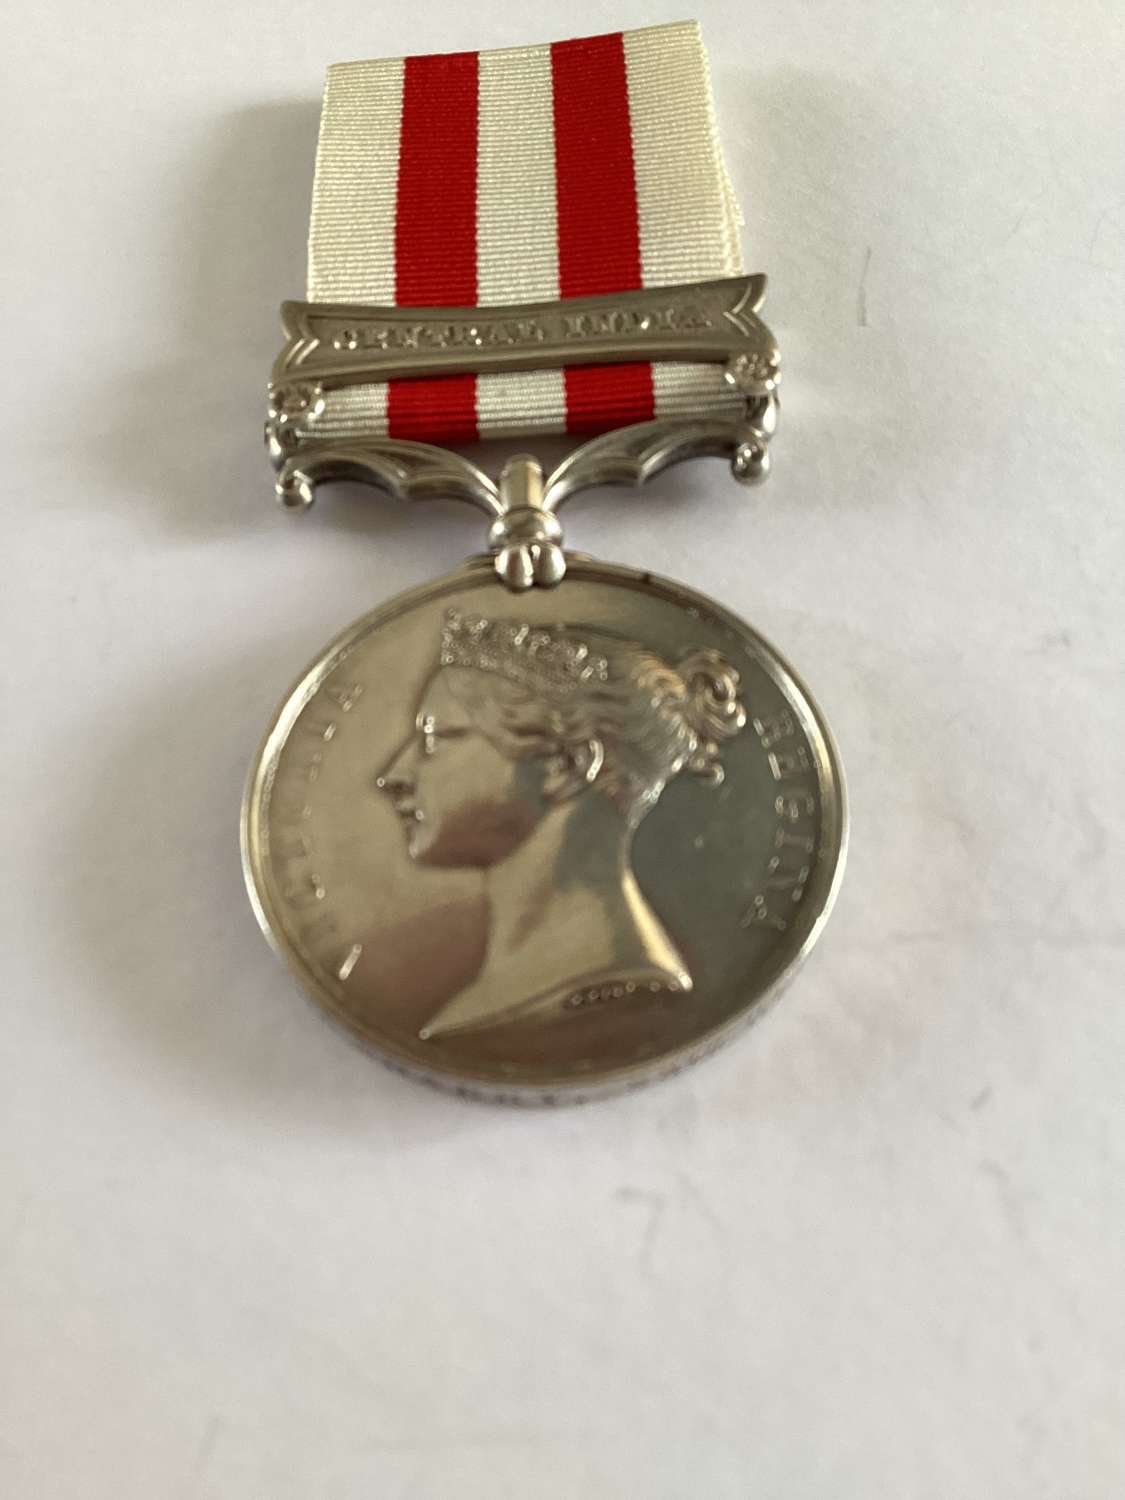 INDIAN MUTINY MEDAL AWARDED TO SERGEANT M. SHARRY, 1ST BATTALION, 88TH